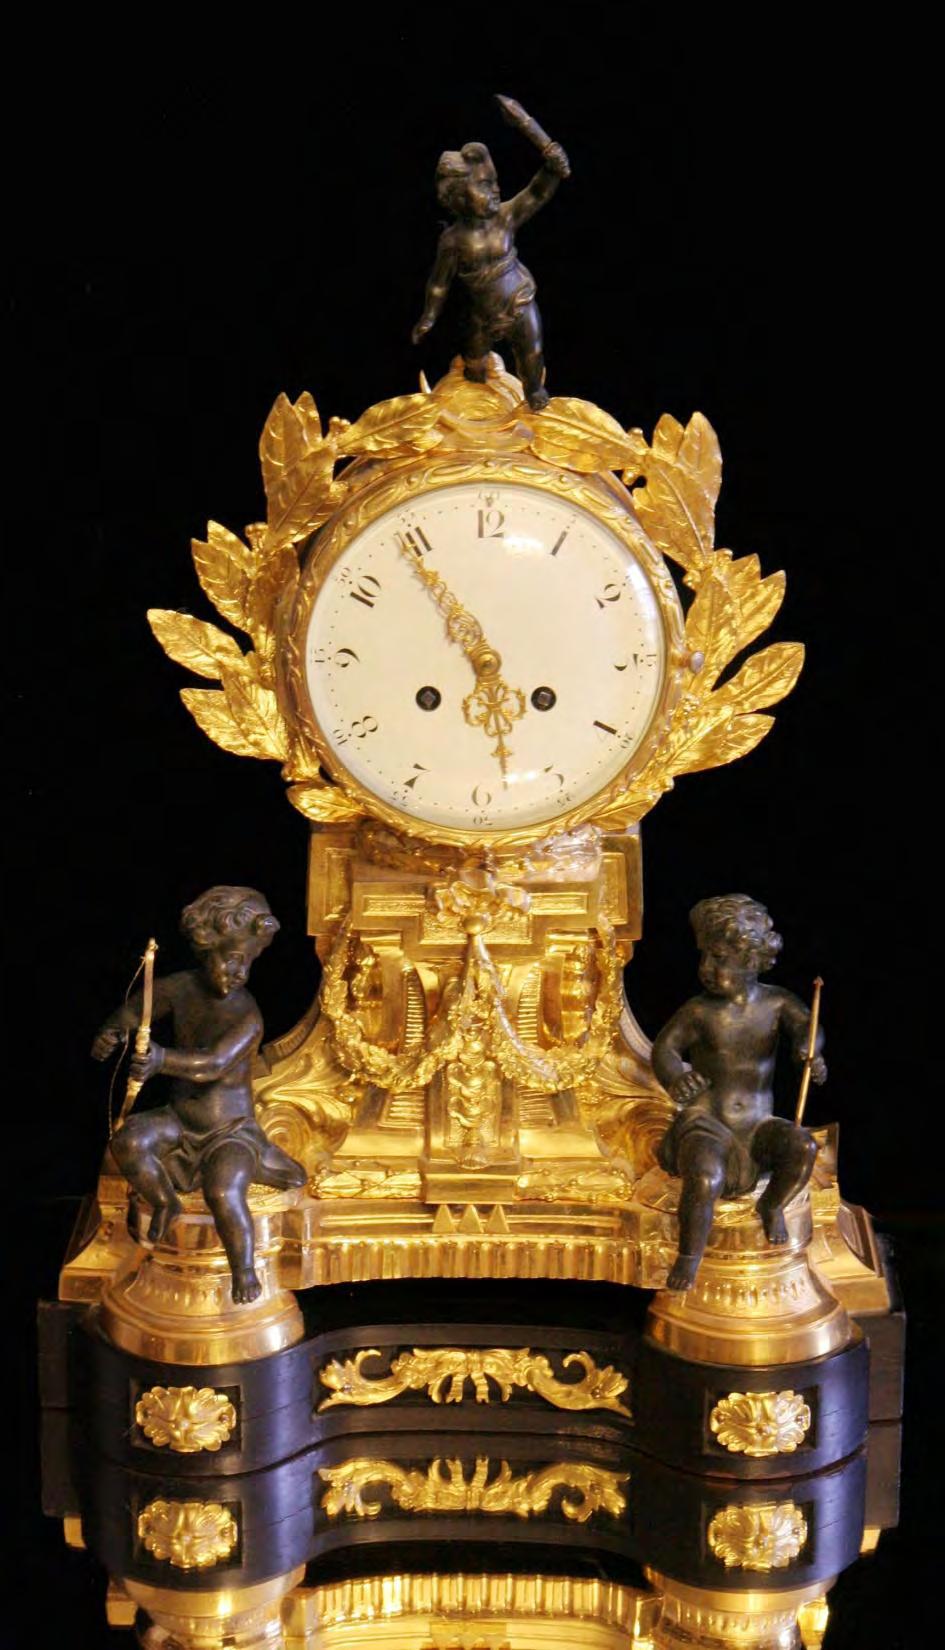 Direct From Paris, An Astounding Early 19th Century, "Napoleon III", Mantel Clock in Gold Plated Bronze and Bronze Patina with Solid Ebony